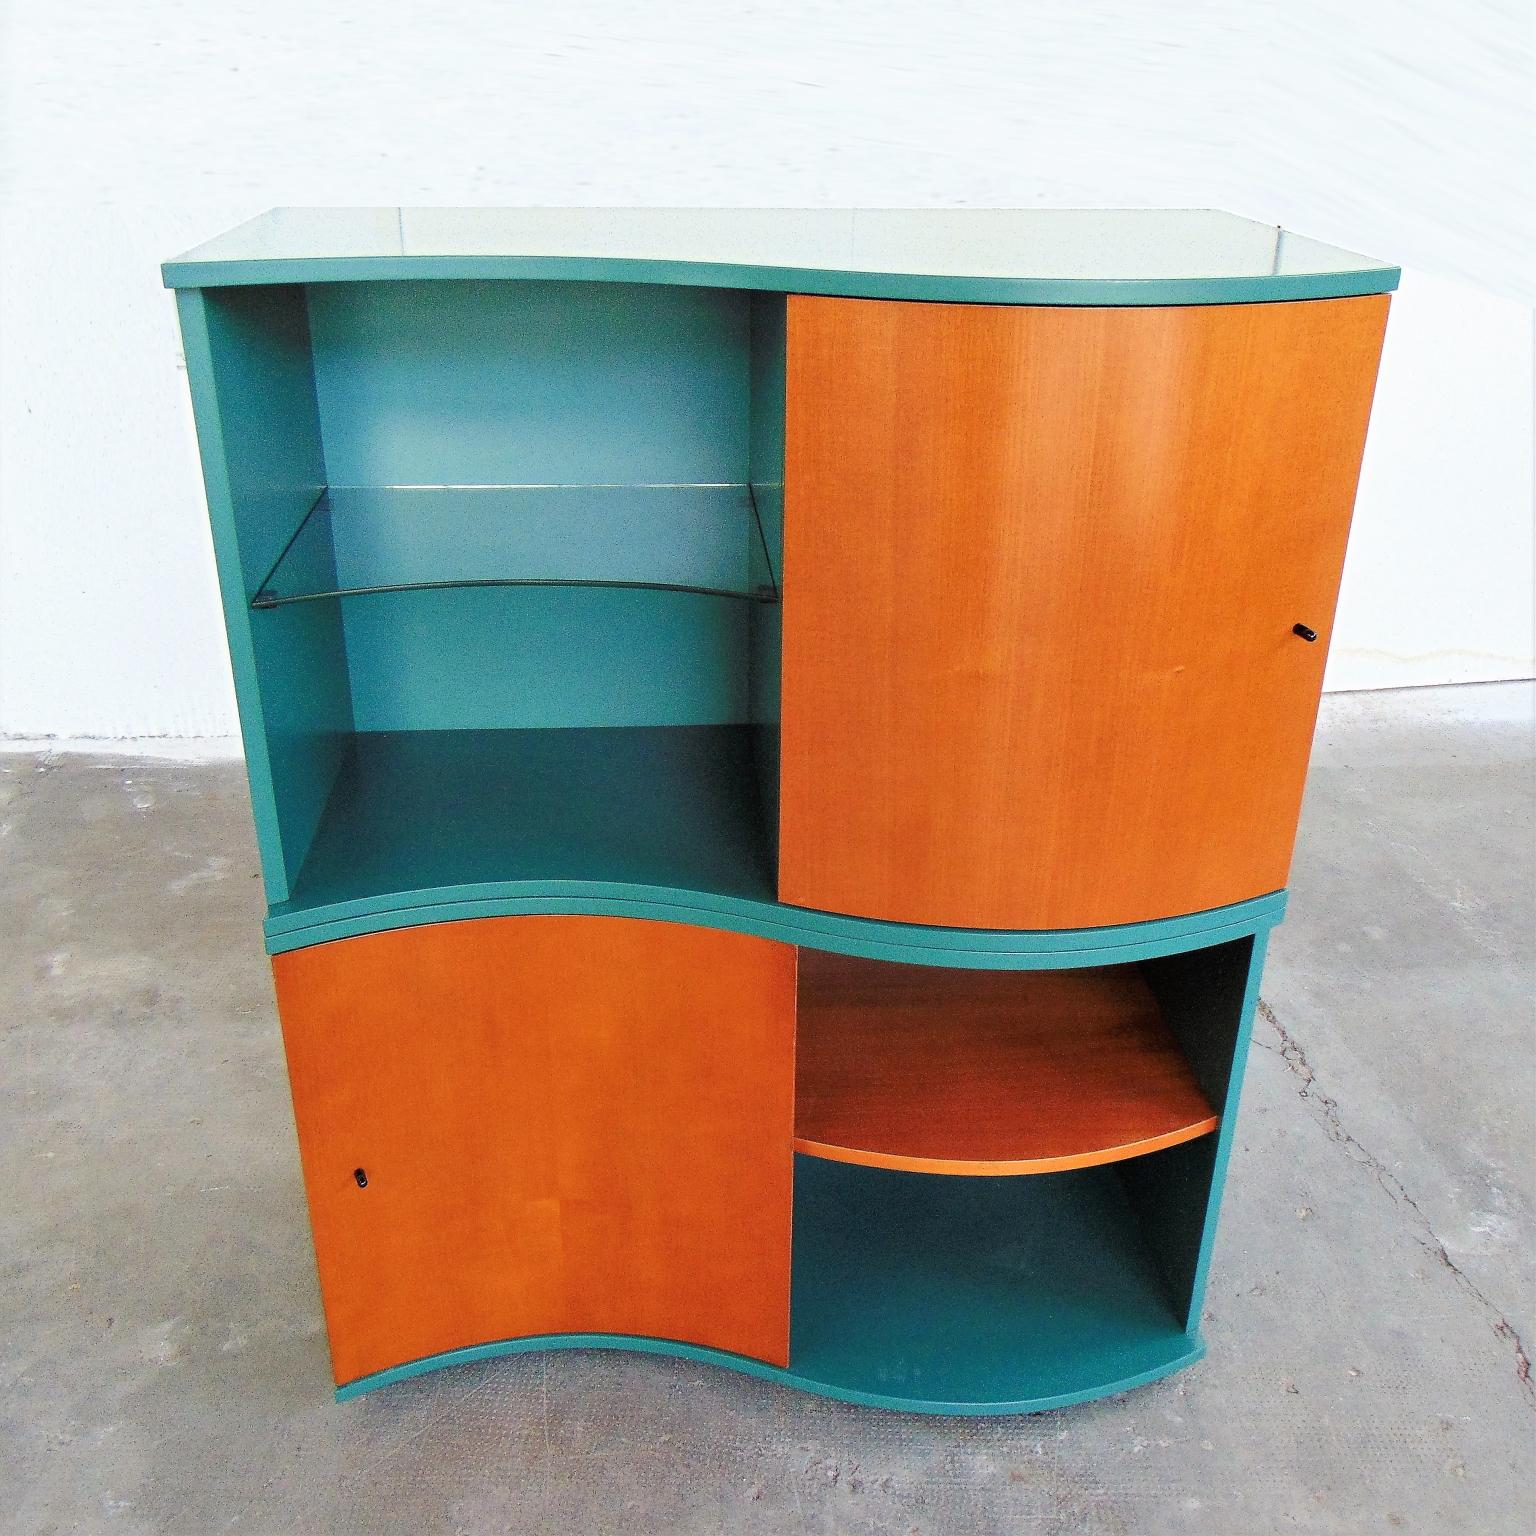 Lacquered 1990 Green and Stained Cherrywood Bookshelf for Roche Bobois by Sormani, Italy For Sale